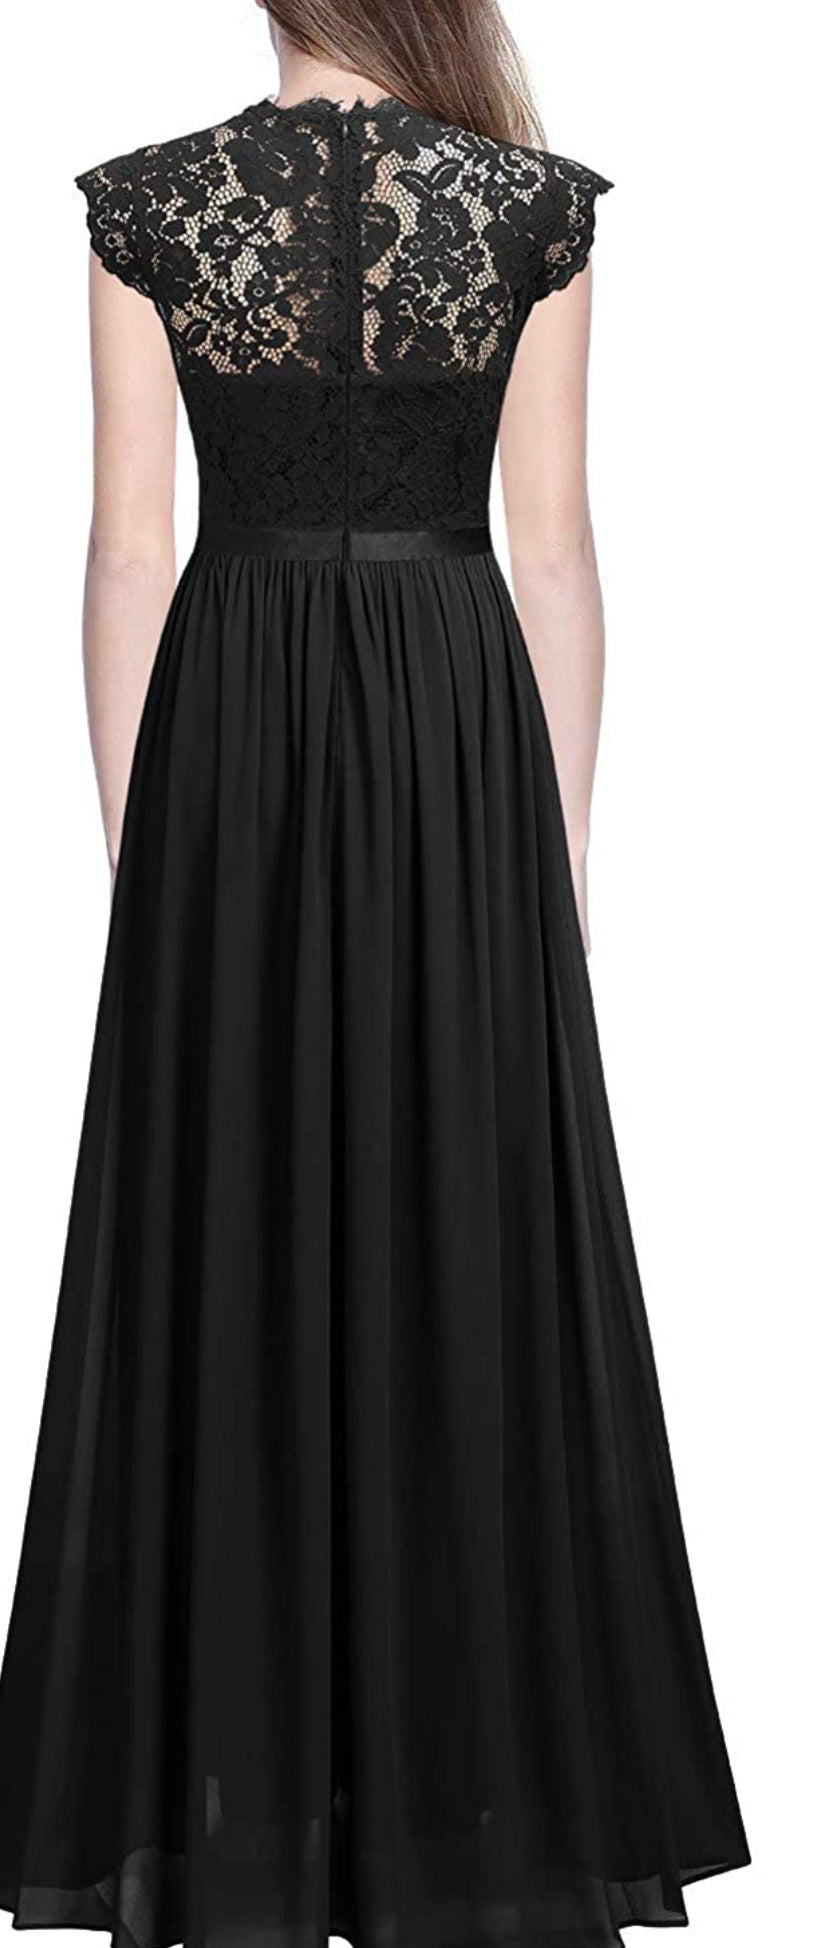 Formal Floral Lace Long Length Dress, Sizes Small - 2XLarge (Black Dress)